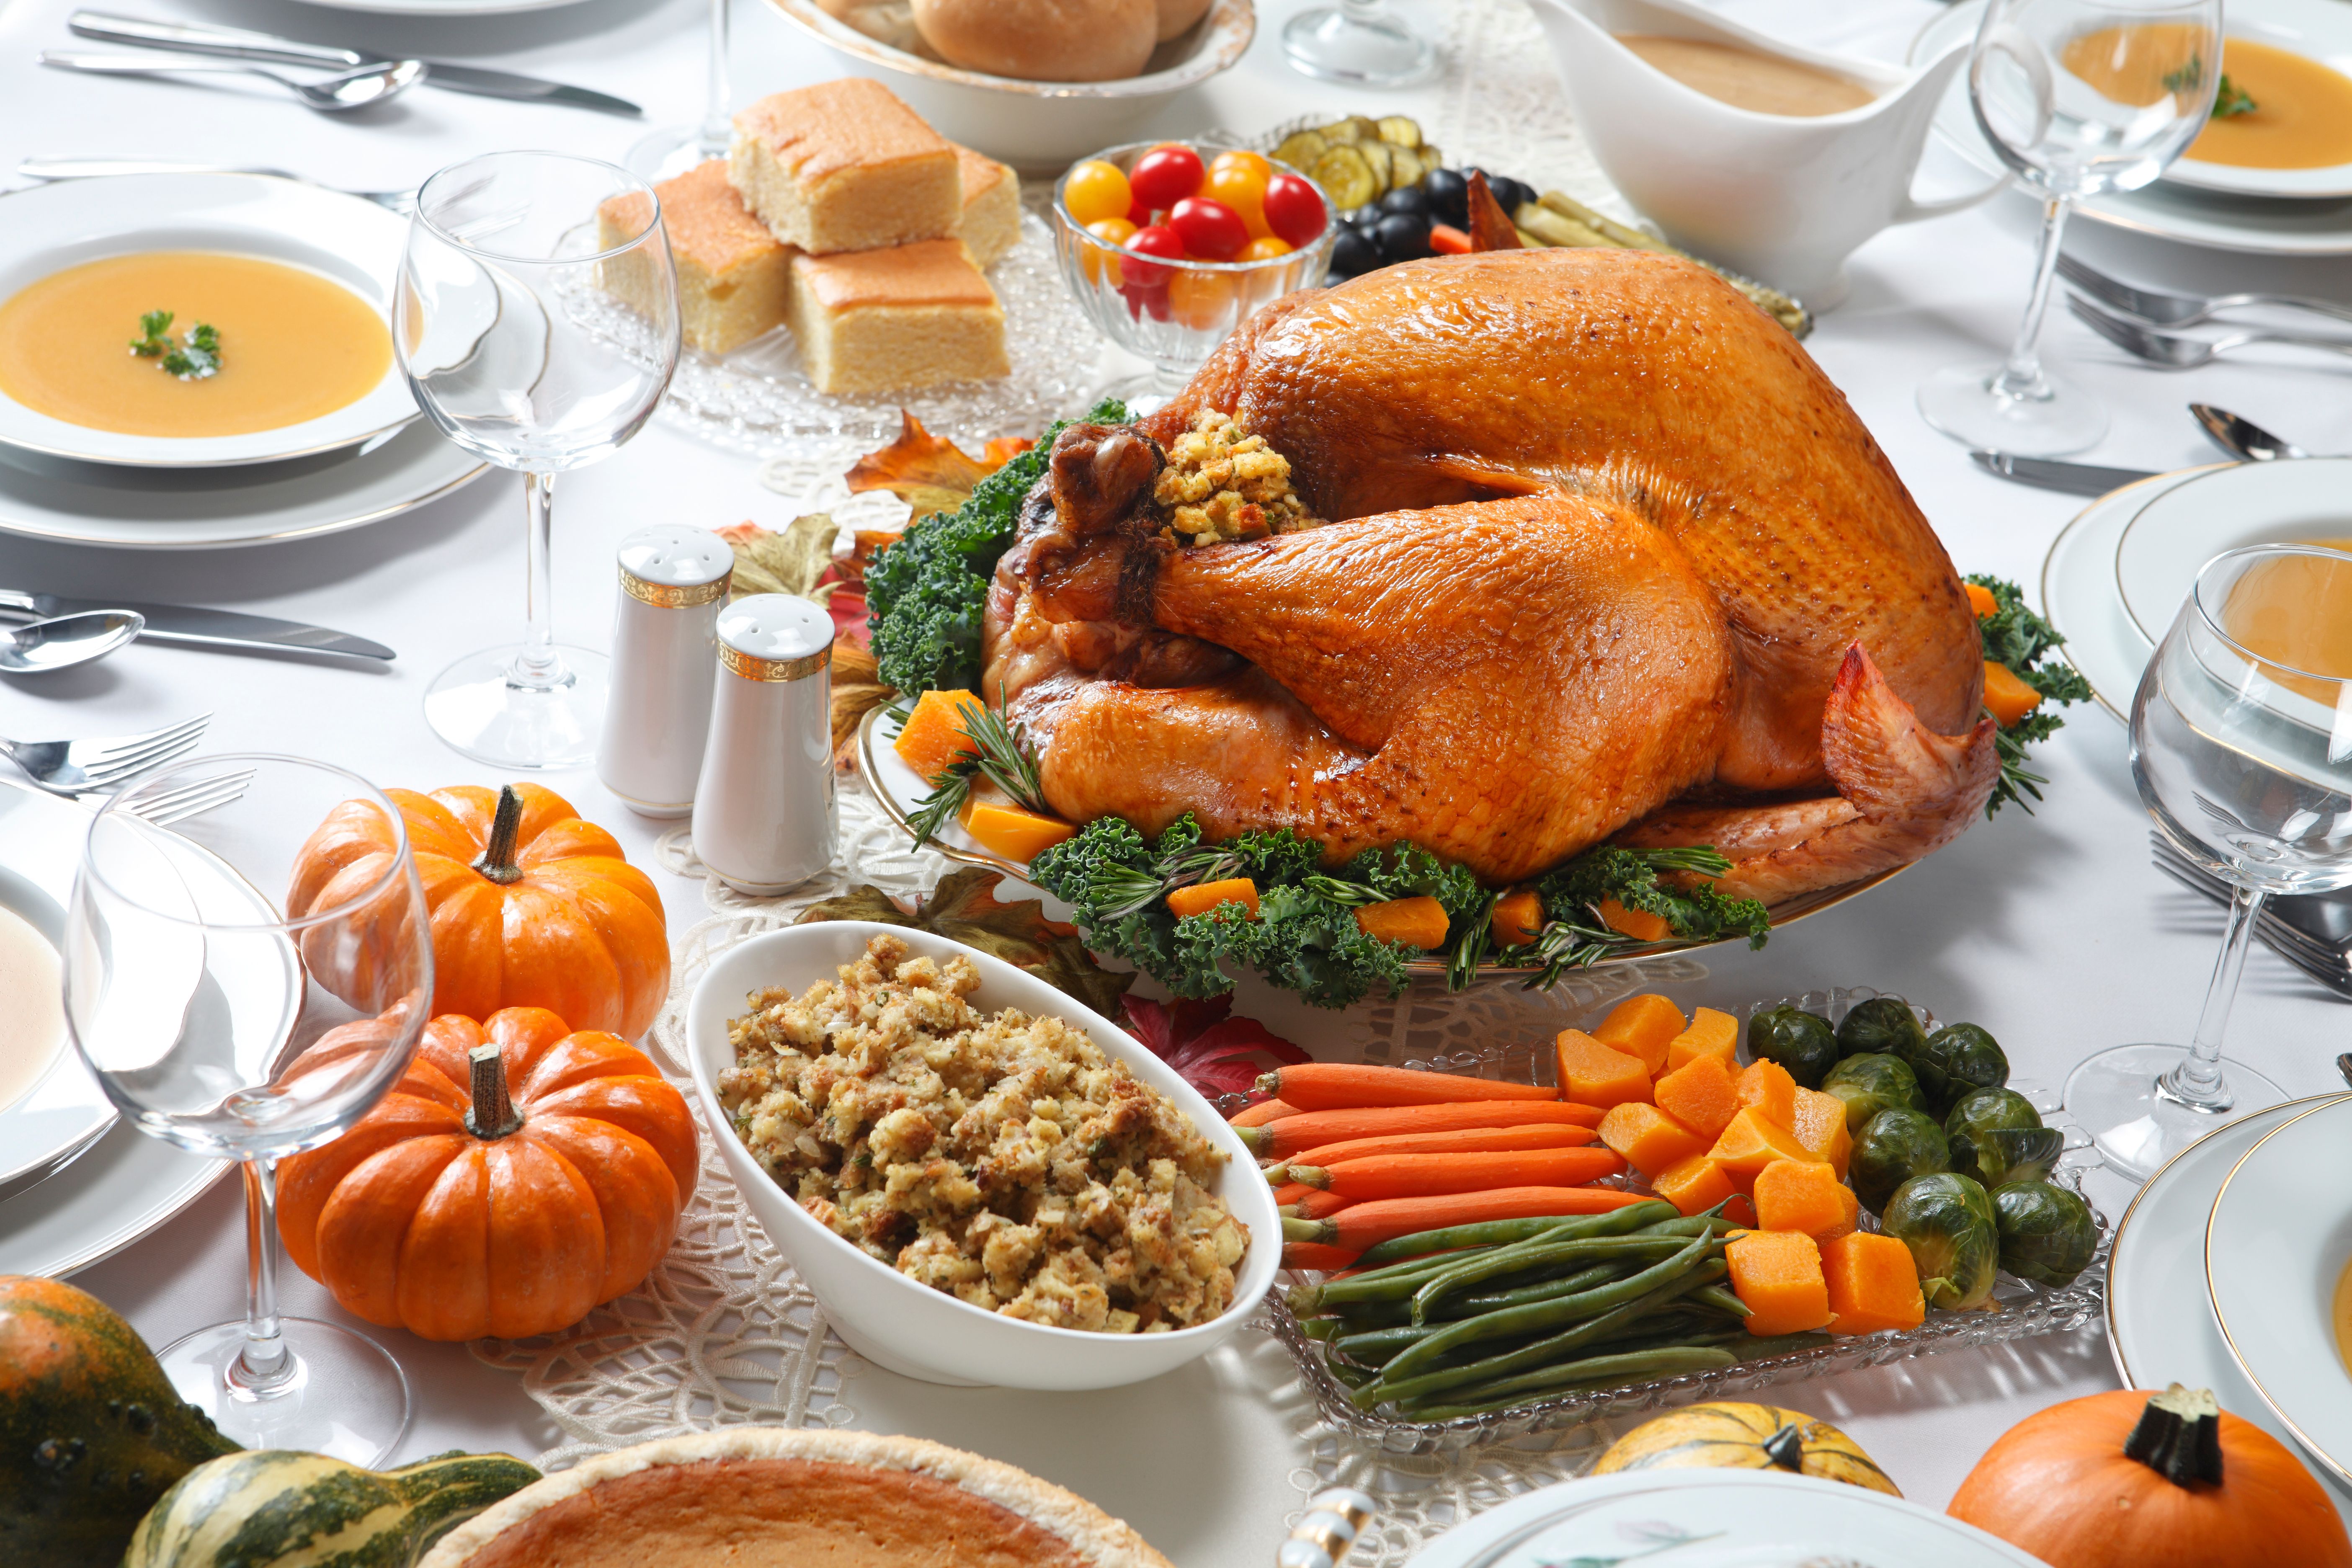 Turkey and other dishes on a table. | Source: Getty Images